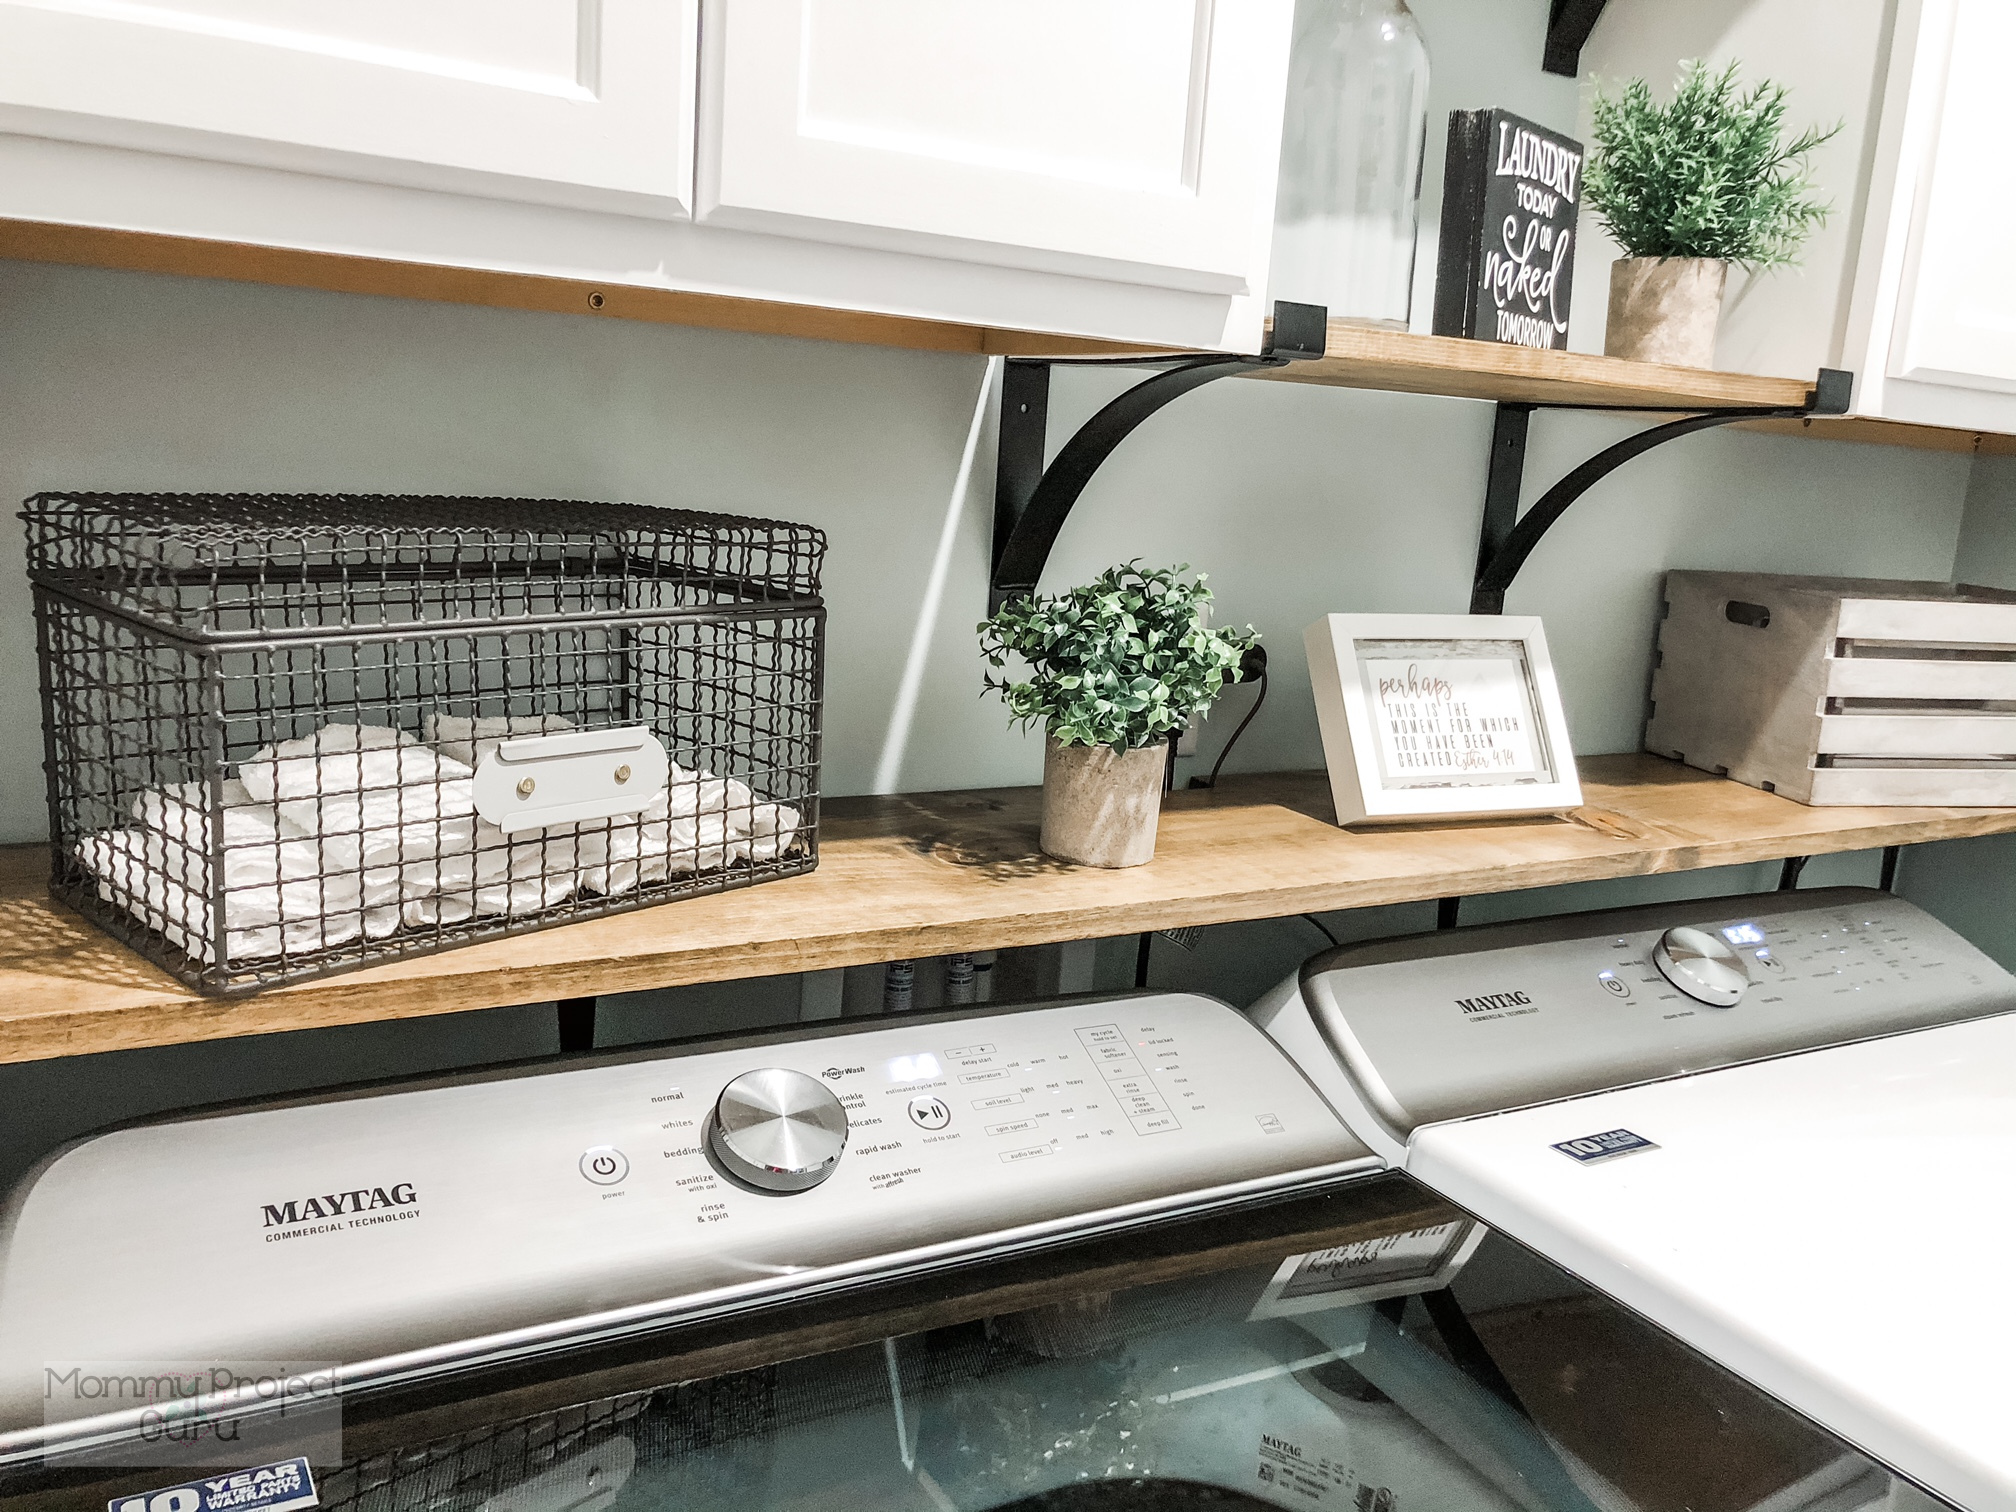 Easy DIY laundry shelf over washer and dryer